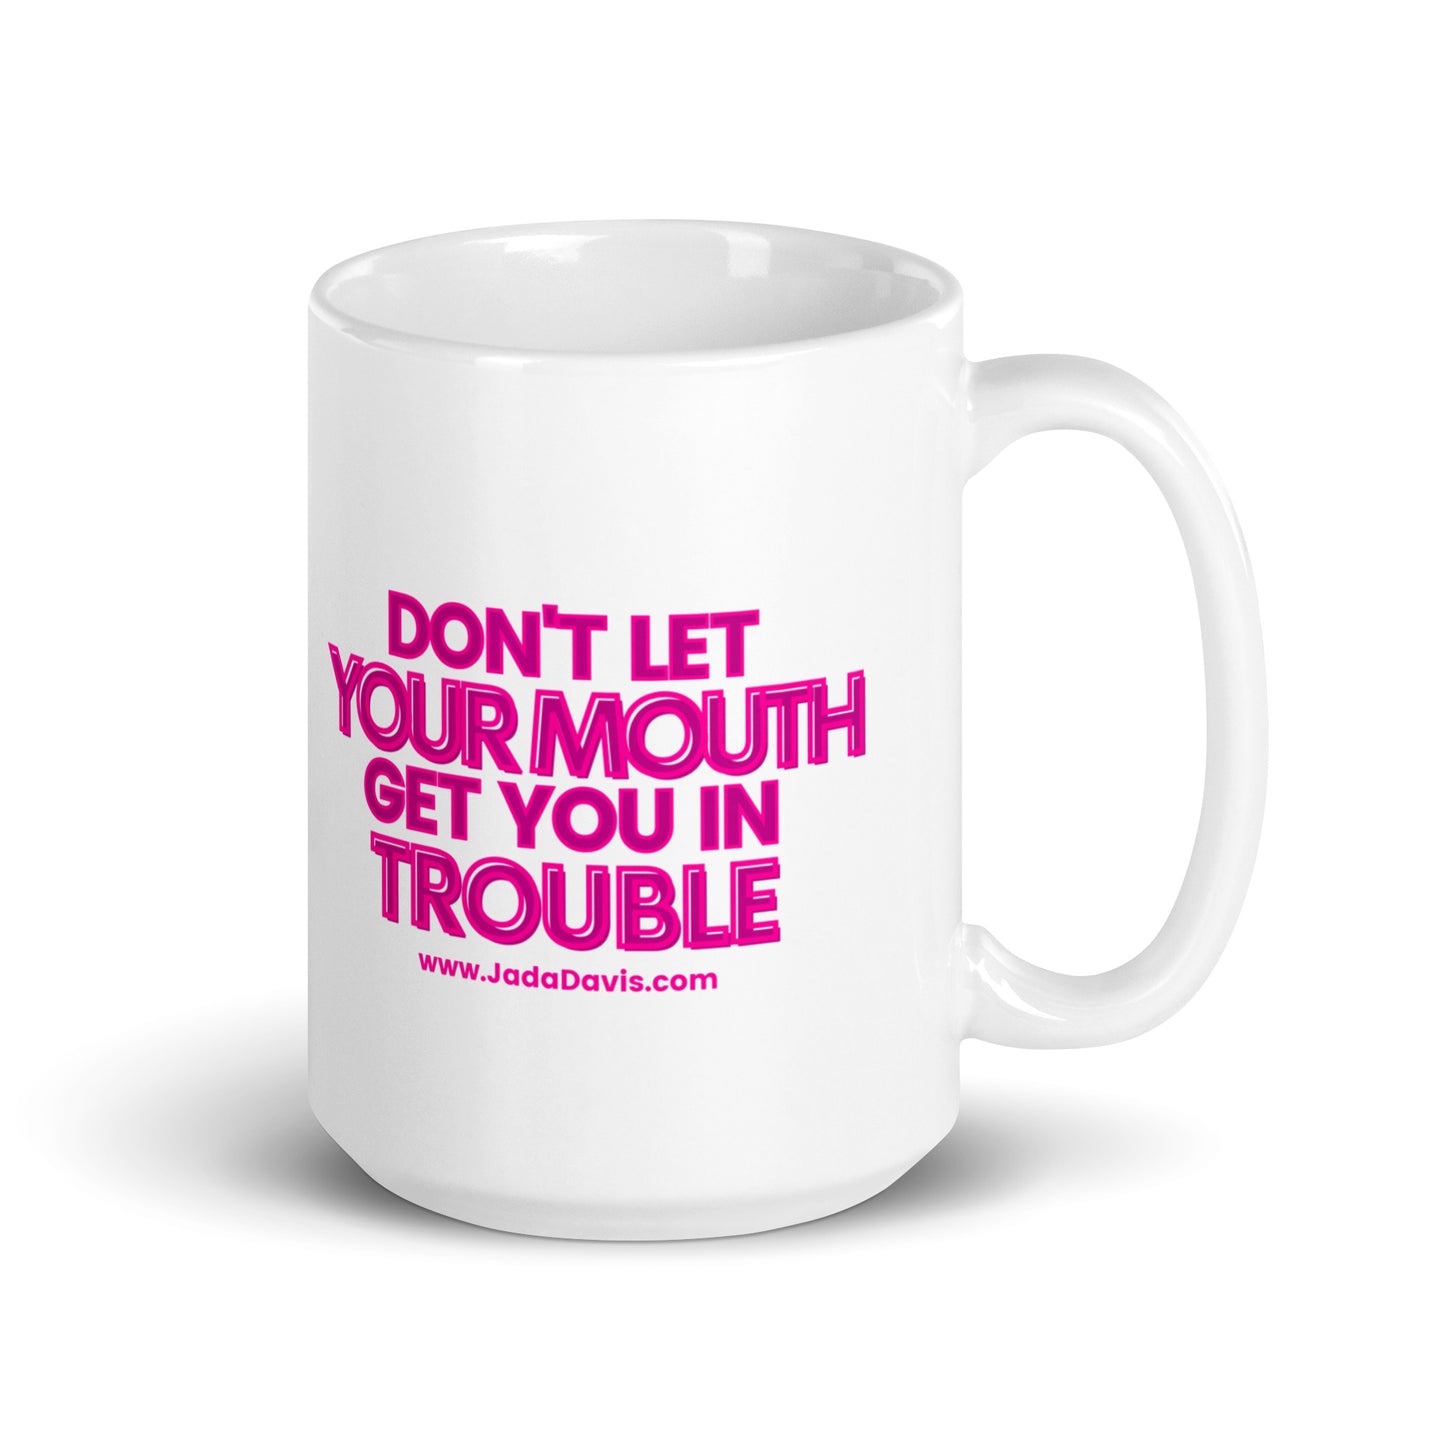 Don't Let Your Mouth Get You In Trouble - Coffee Mug